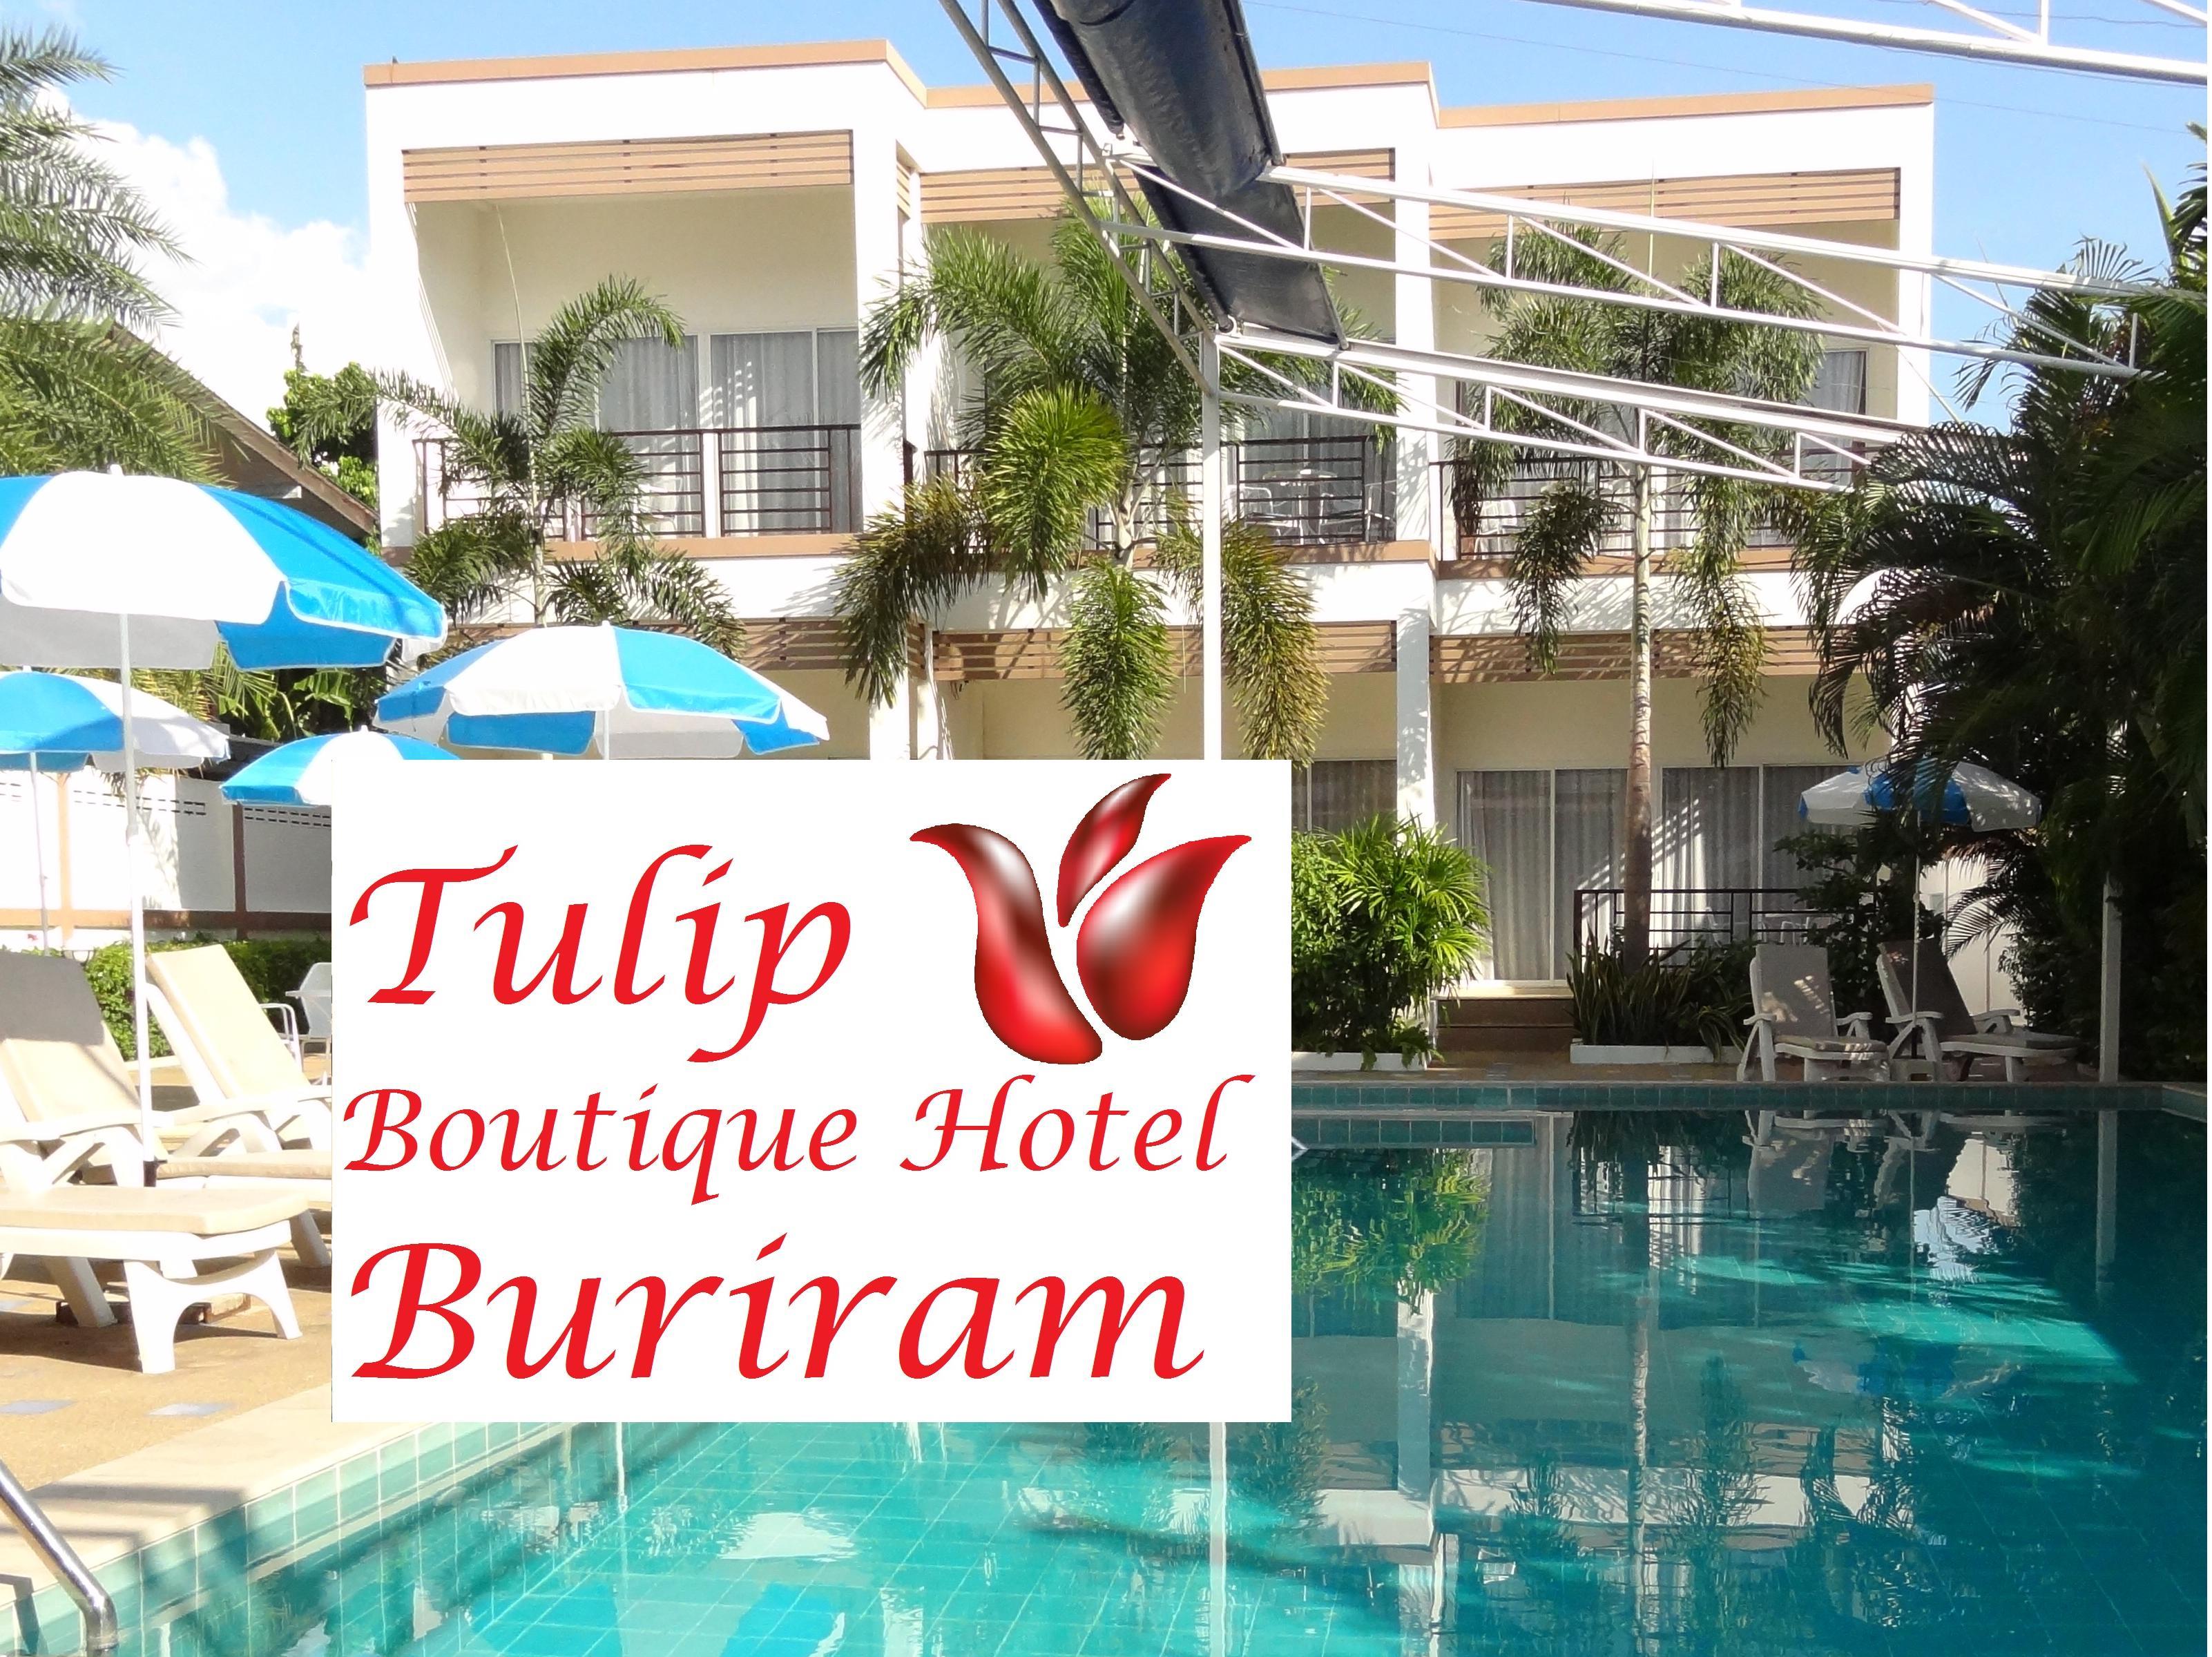 Tulip Boutique Hotel Thailand FAQ 2016, What facilities are there in Tulip Boutique Hotel Thailand 2016, What Languages Spoken are Supported in Tulip Boutique Hotel Thailand 2016, Which payment cards are accepted in Tulip Boutique Hotel Thailand , Thailand Tulip Boutique Hotel room facilities and services Q&A 2016, Thailand Tulip Boutique Hotel online booking services 2016, Thailand Tulip Boutique Hotel address 2016, Thailand Tulip Boutique Hotel telephone number 2016,Thailand Tulip Boutique Hotel map 2016, Thailand Tulip Boutique Hotel traffic guide 2016, how to go Thailand Tulip Boutique Hotel, Thailand Tulip Boutique Hotel booking online 2016, Thailand Tulip Boutique Hotel room types 2016.